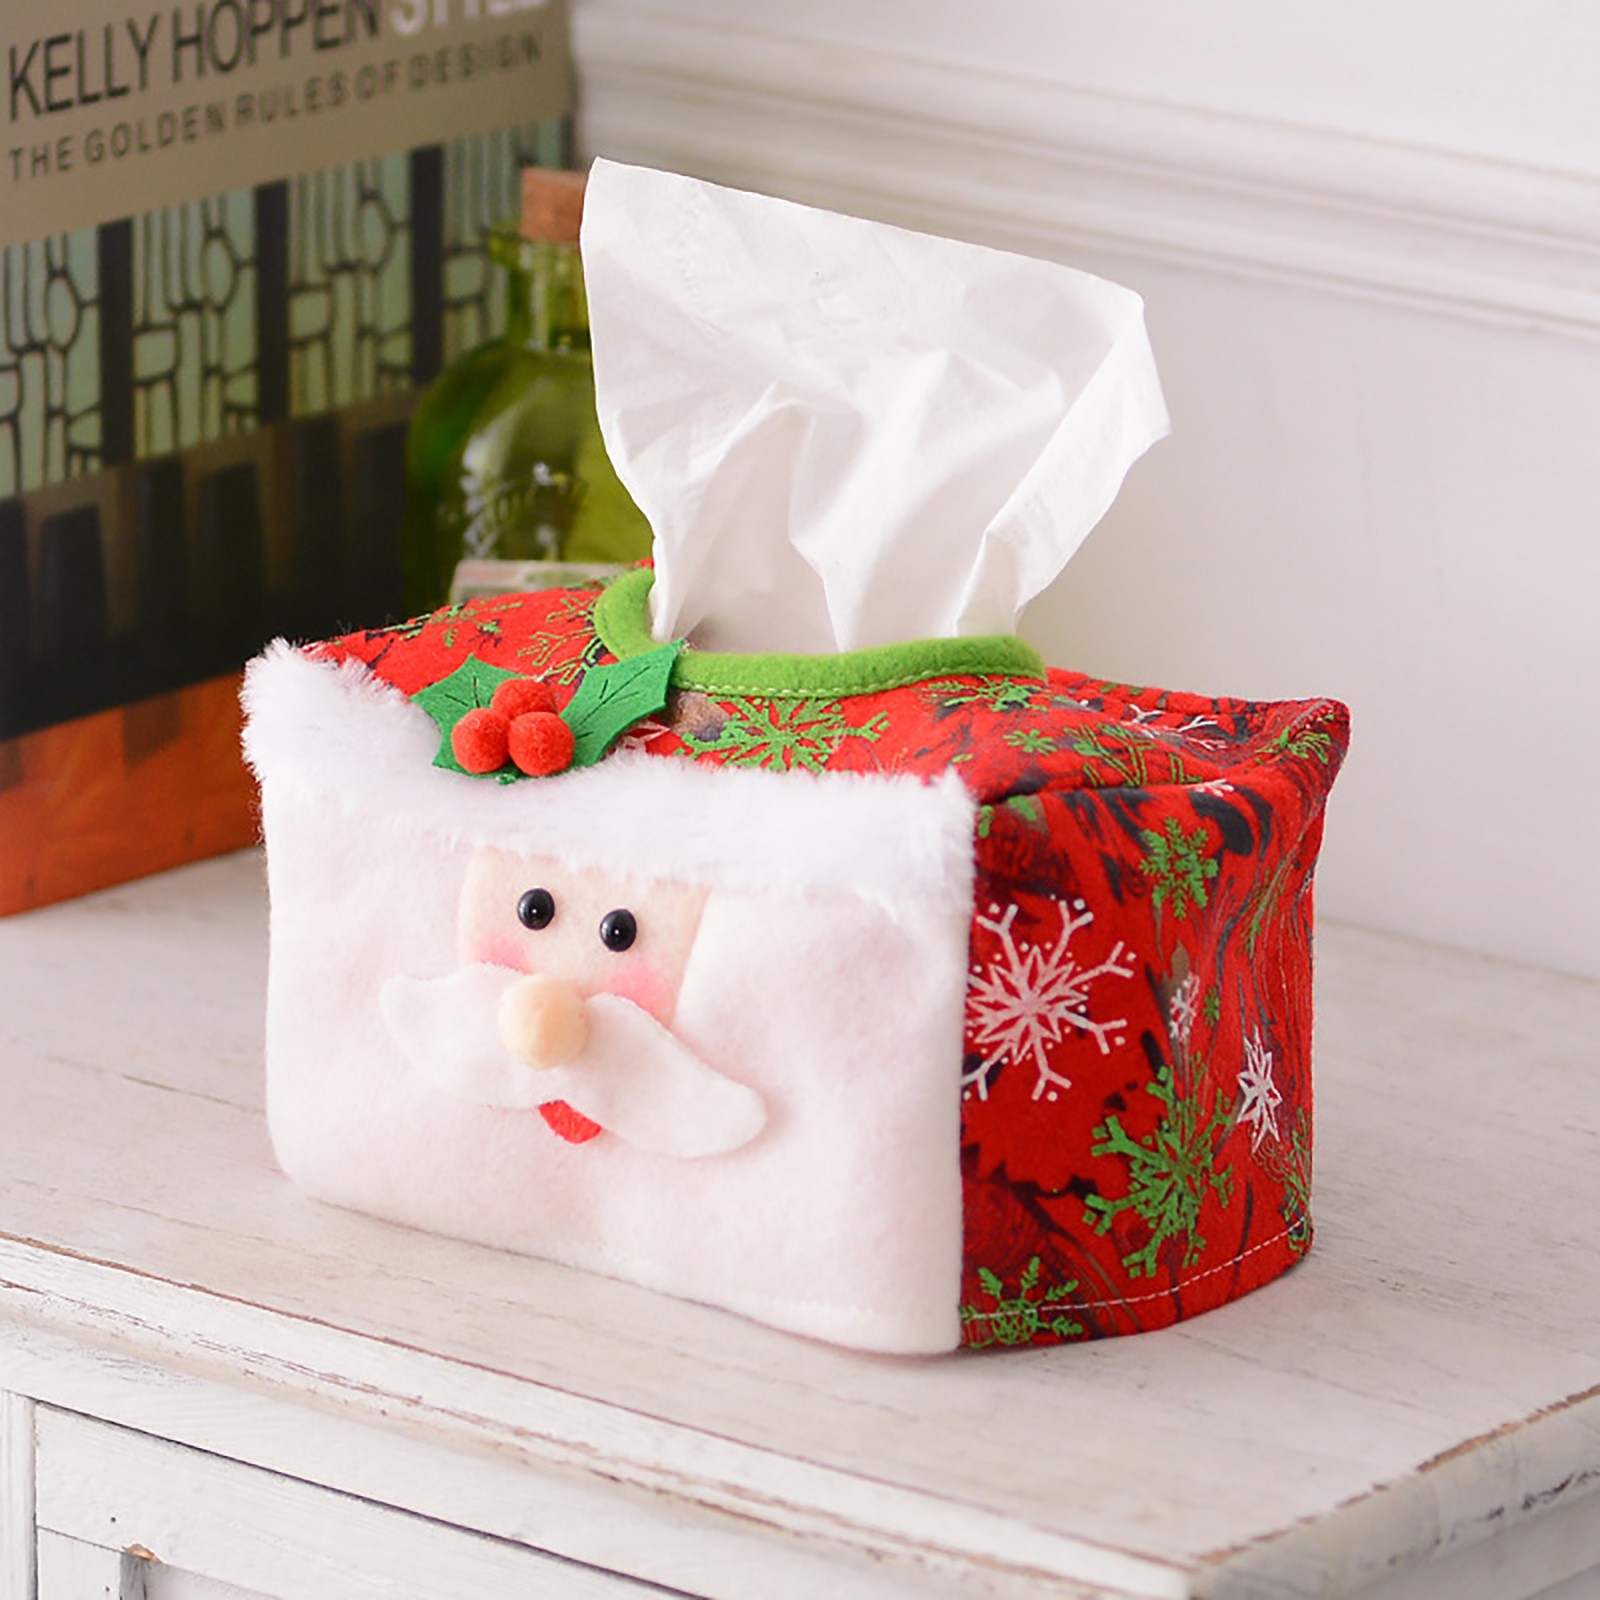 Yubnlvae Christmas Tissue Paper Boxes Christmas Decorations Christmas  Tissue Box Is Suitable for Most Facial Tissues, Other Tissue Boxes,  Advanced